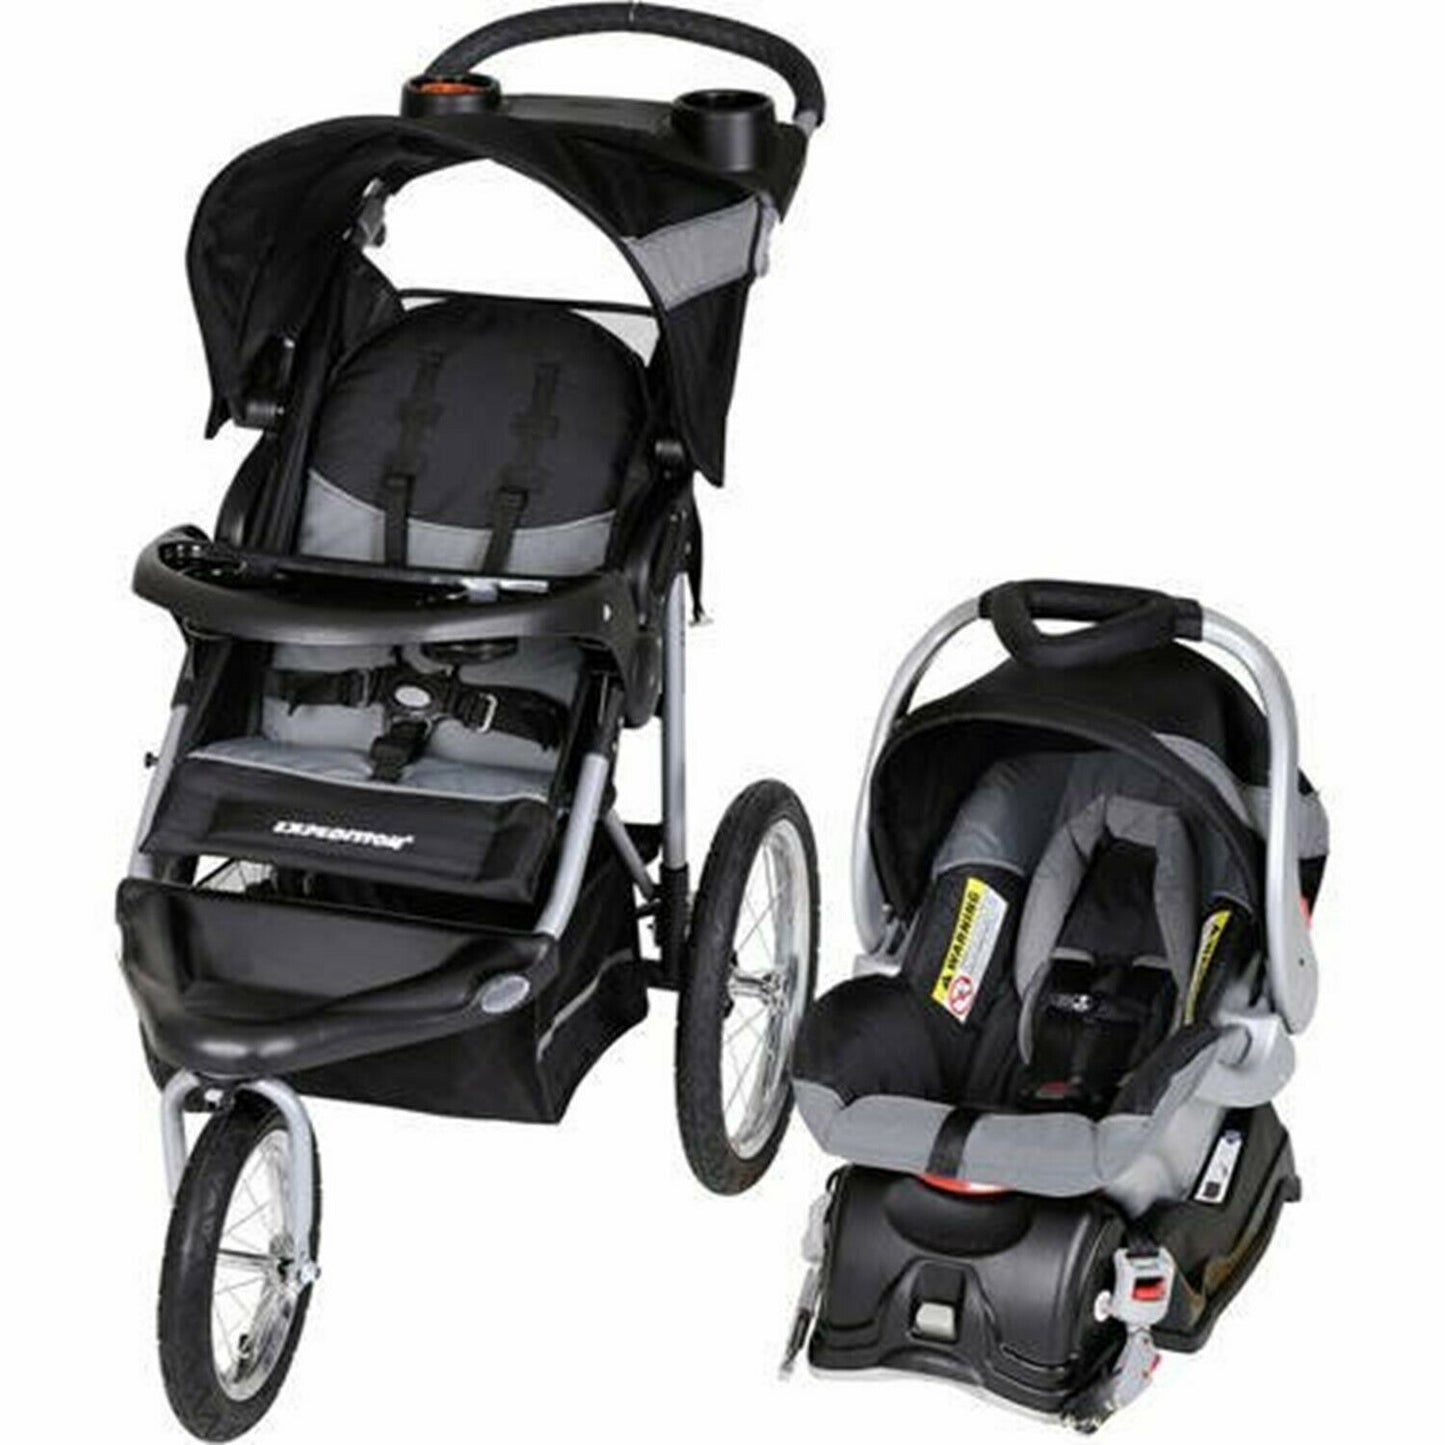 Baby Trend Jogger Stroller with Car Seat Travel System Playard High Chair Bag